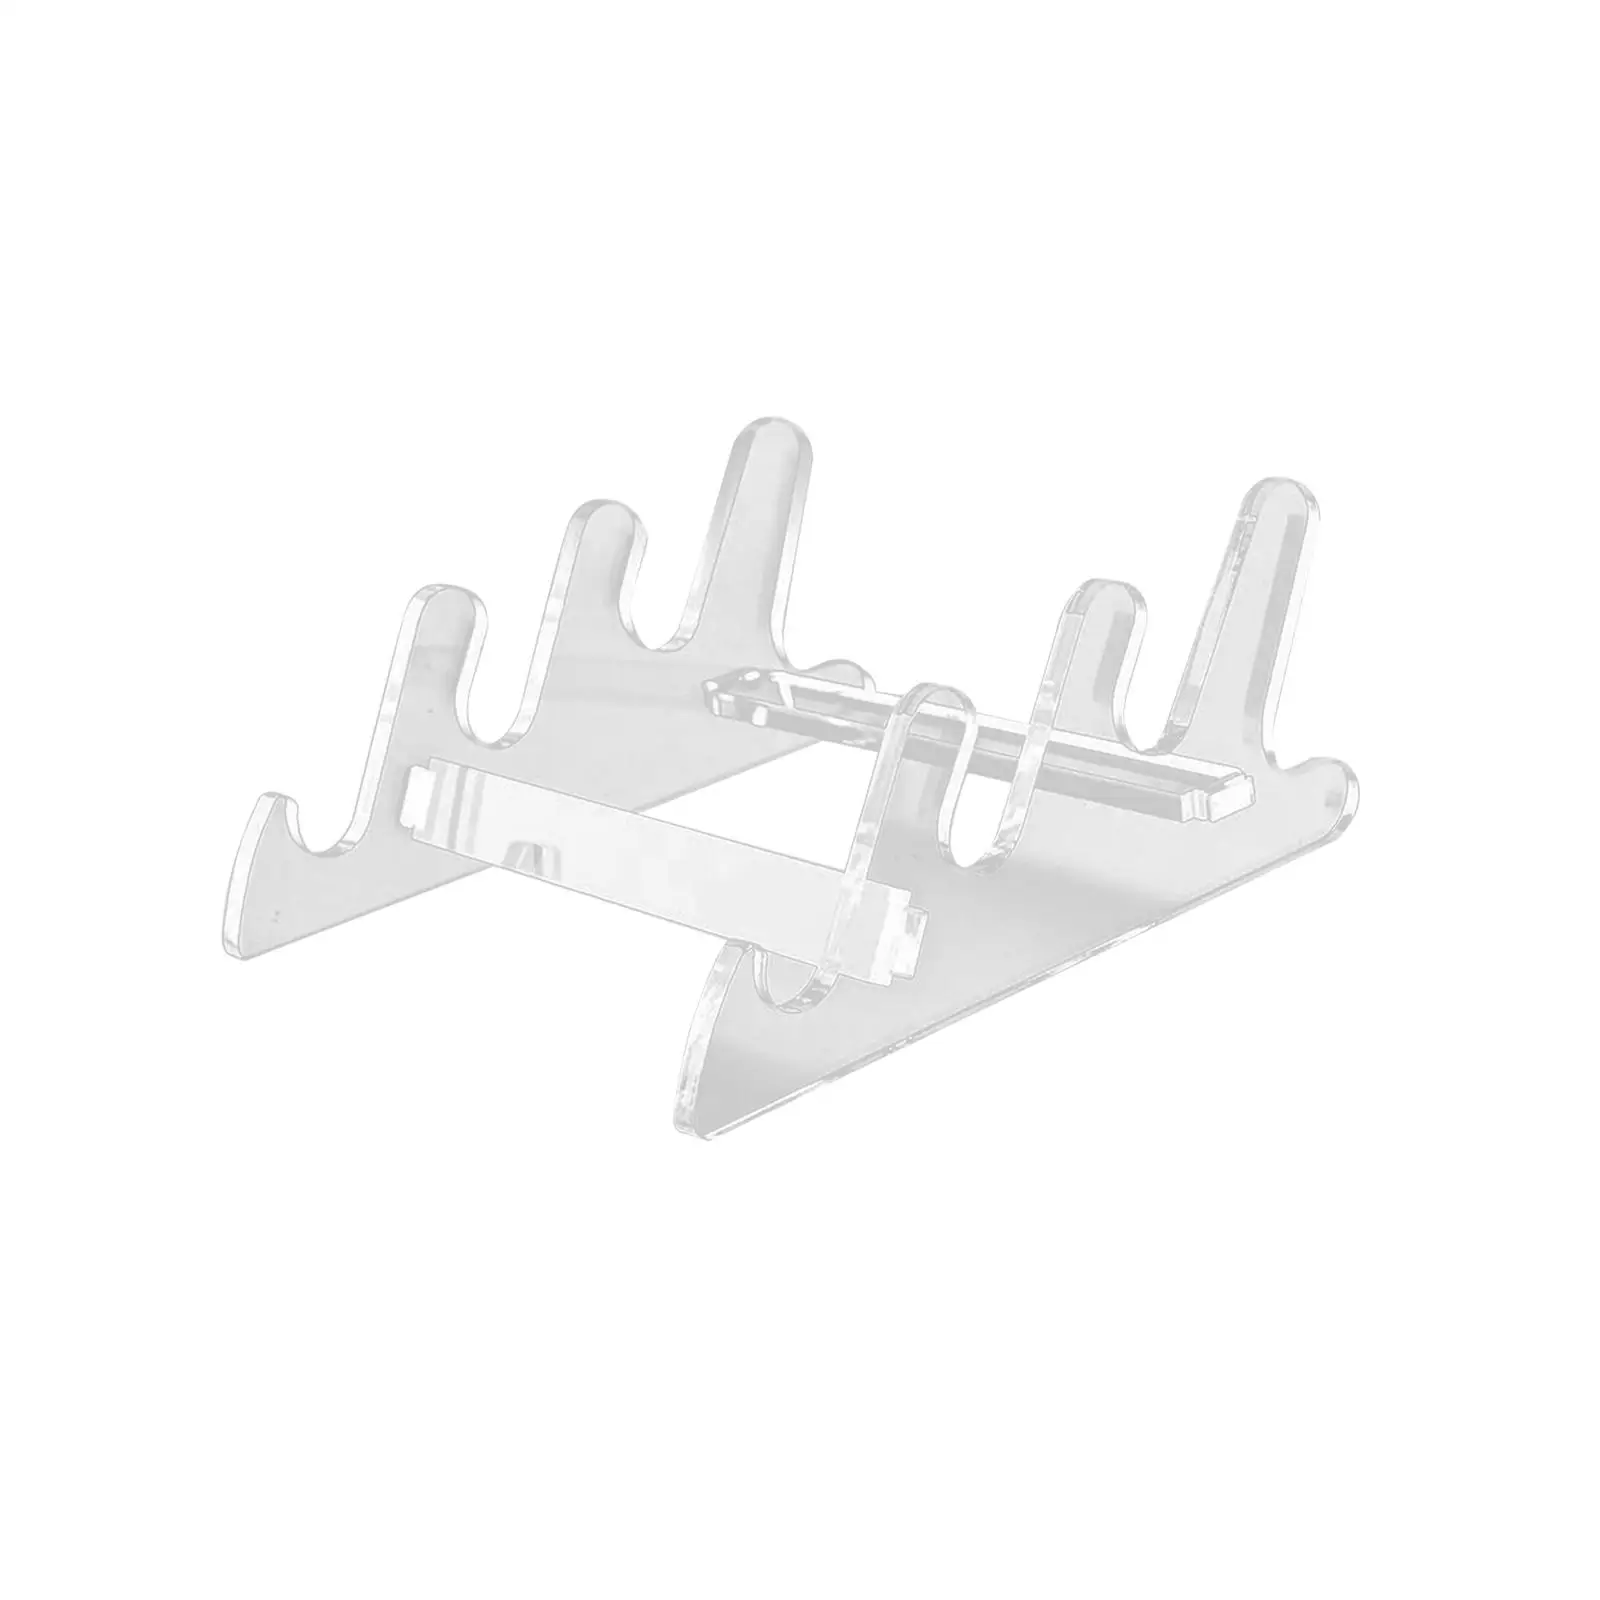 Transparent Acrylic Keyboard stand to Disassemble Easy Typing Display Stand Keyboard Bracket Holder for School Desk Office